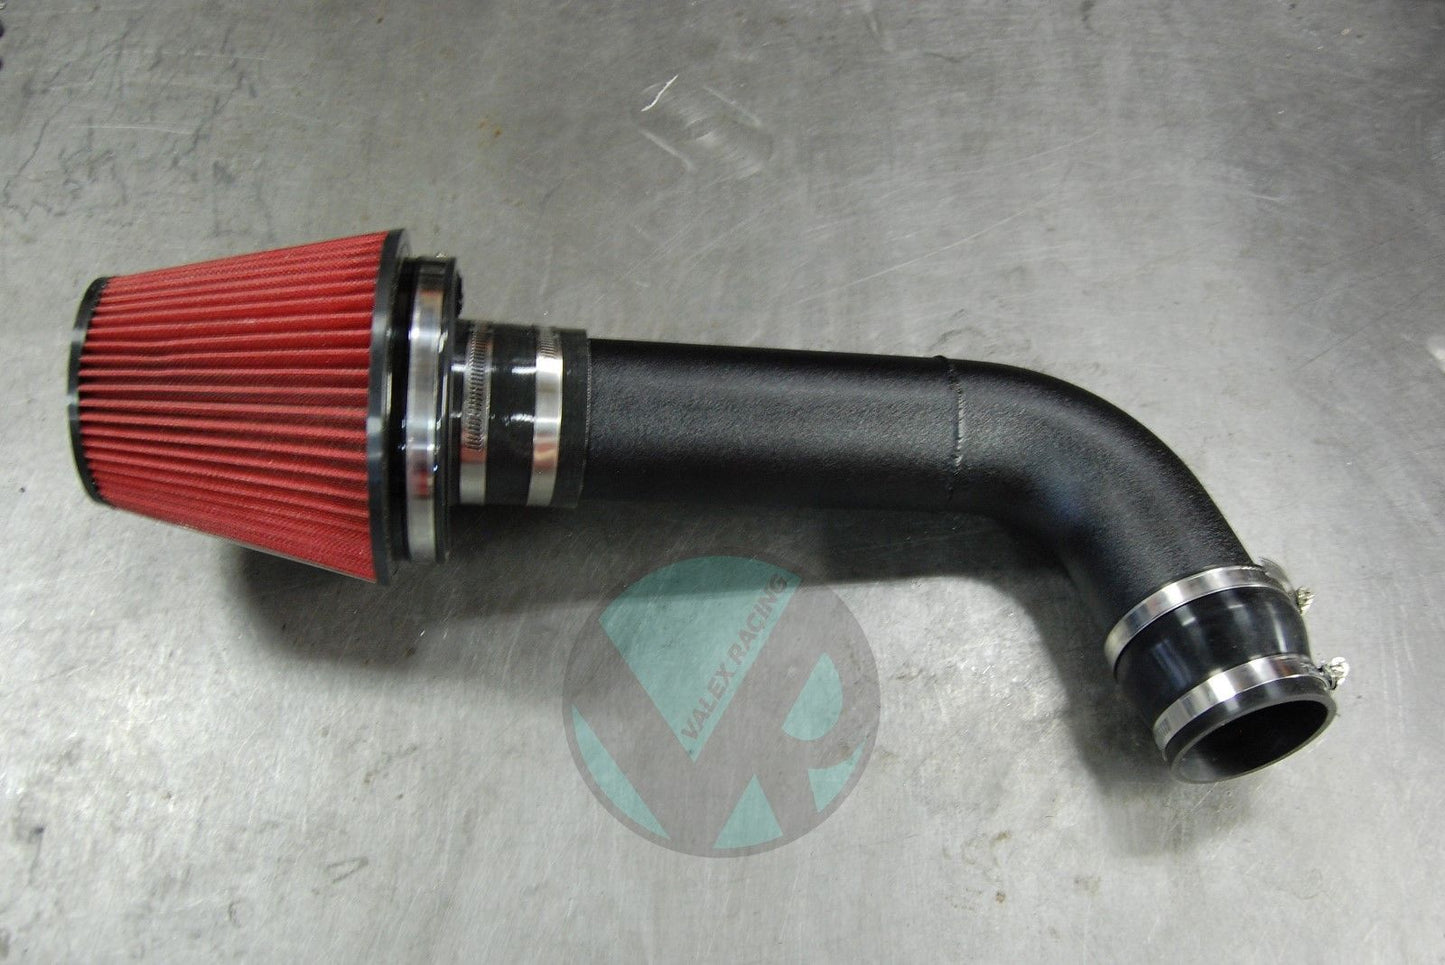 Honda/Acura 3.5" Race Intake System with Blox Racing Velocity Stack Powder Coated Black